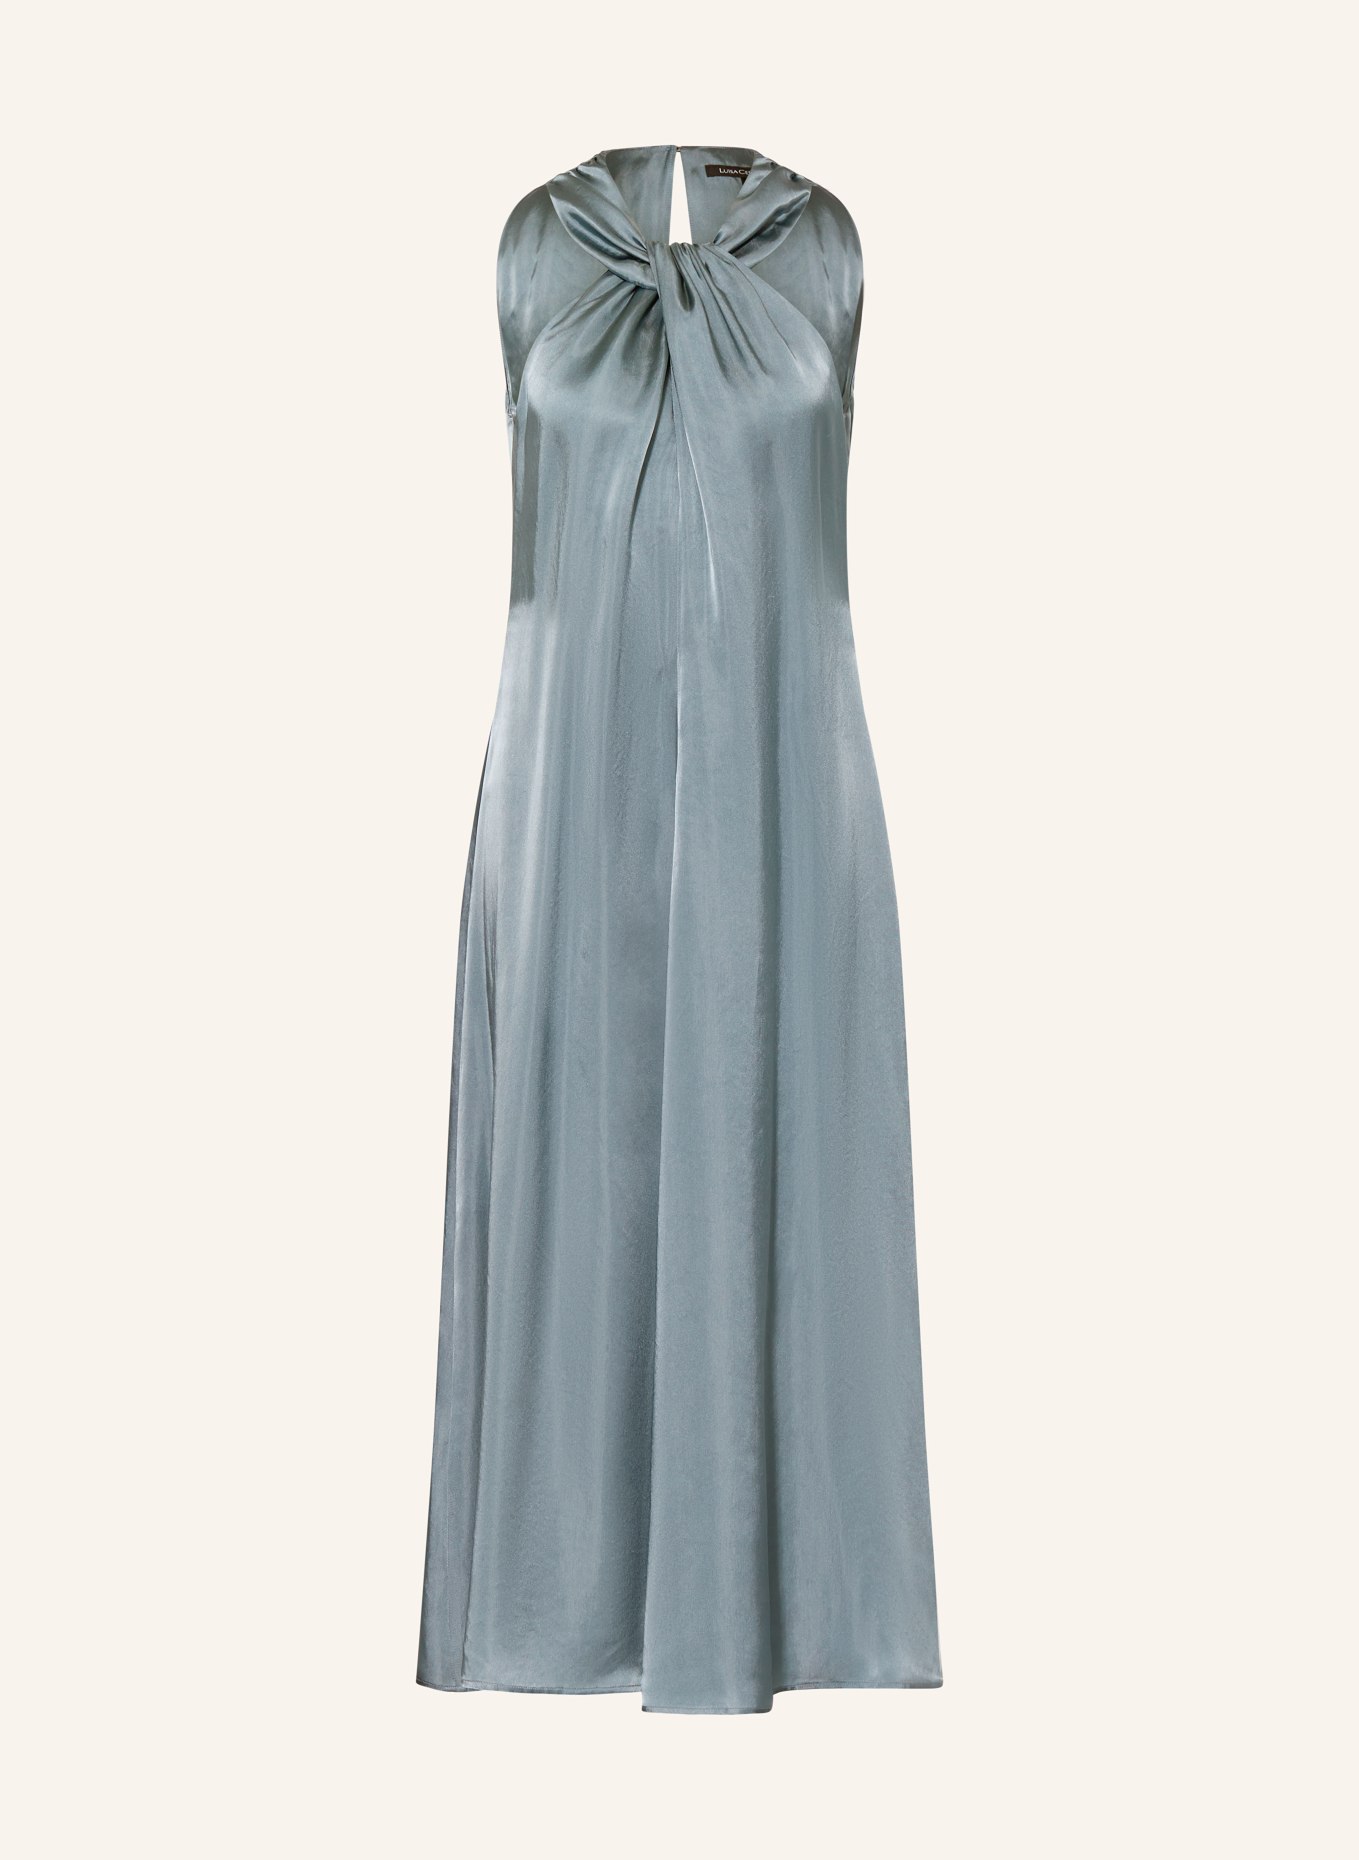 LUISA CERANO Cocktail dress made of satin, Color: BLUE GRAY (Image 1)